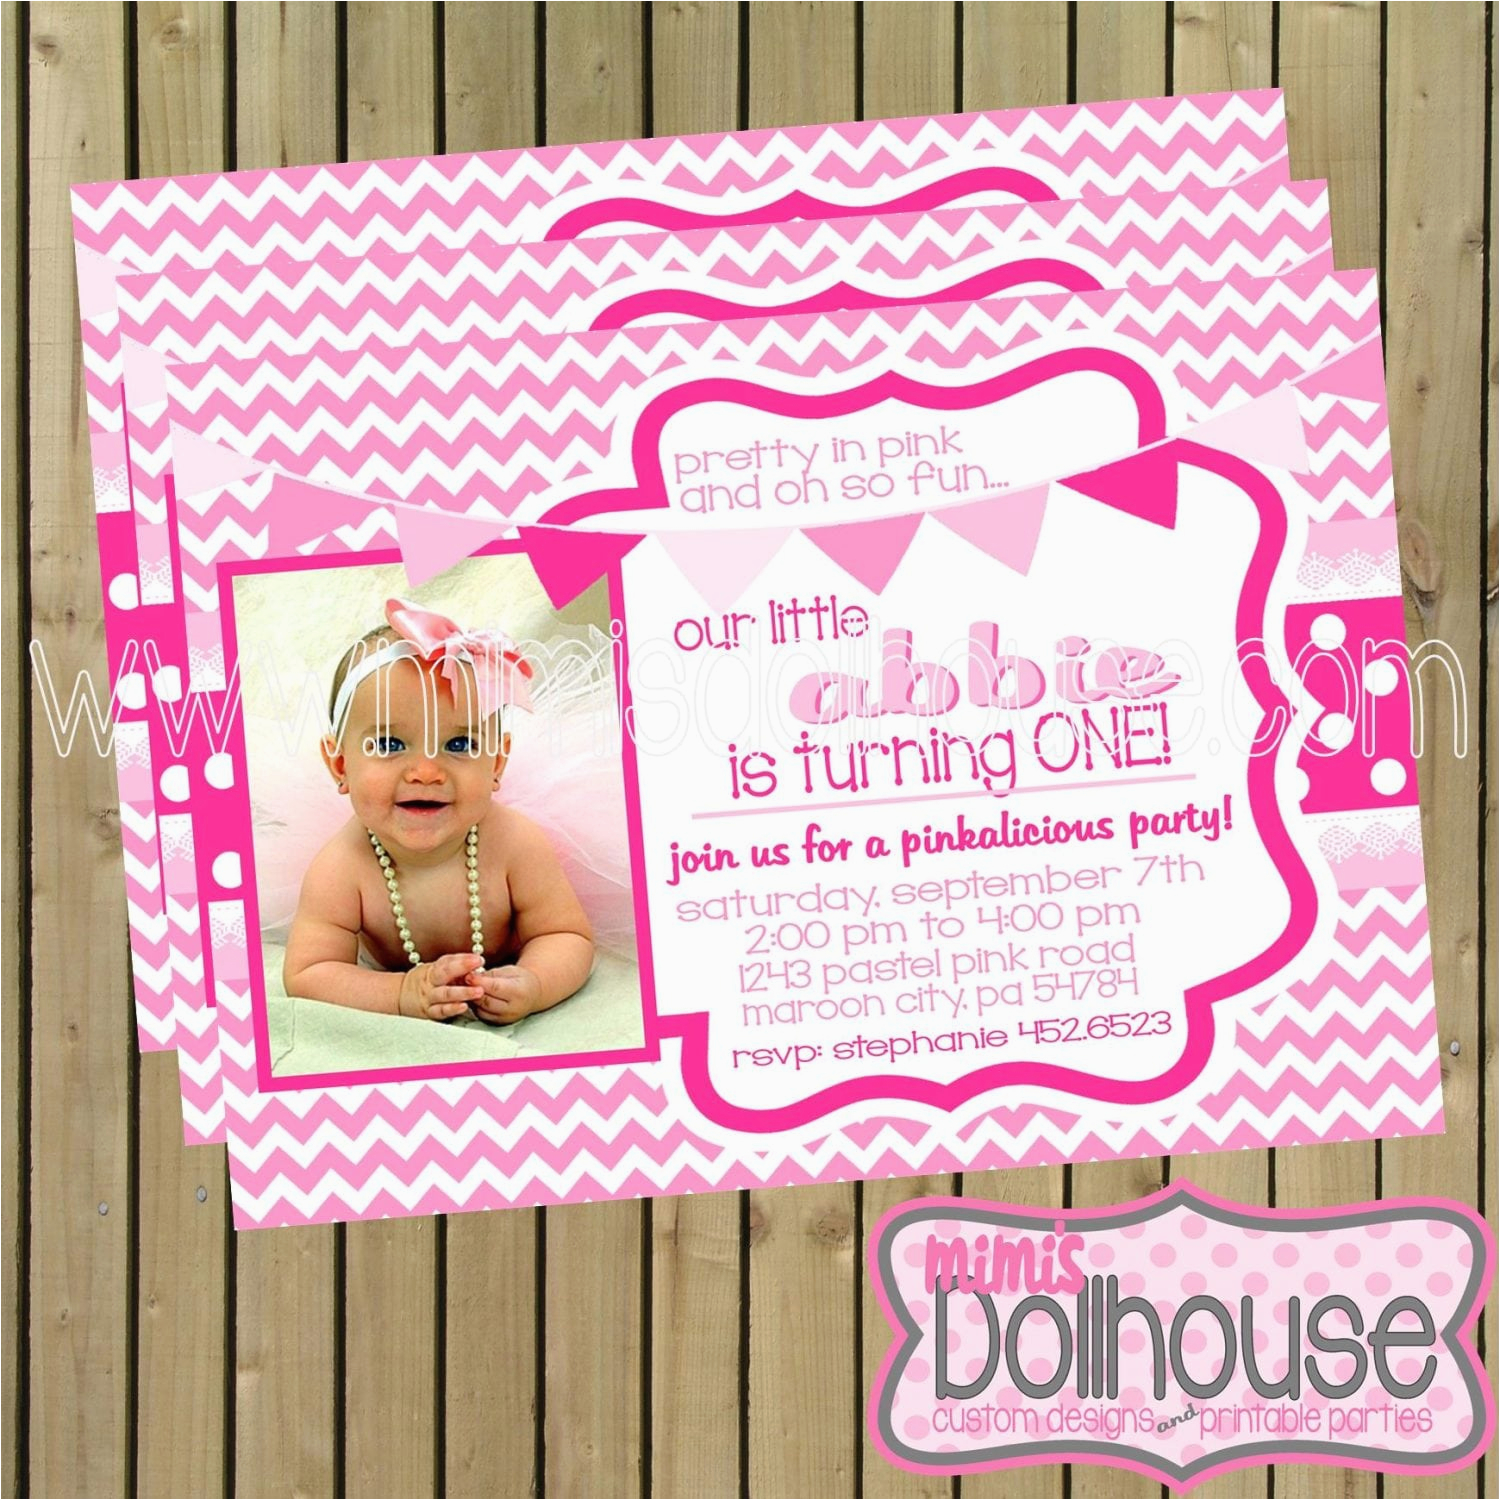 pretty in pink party printable collection